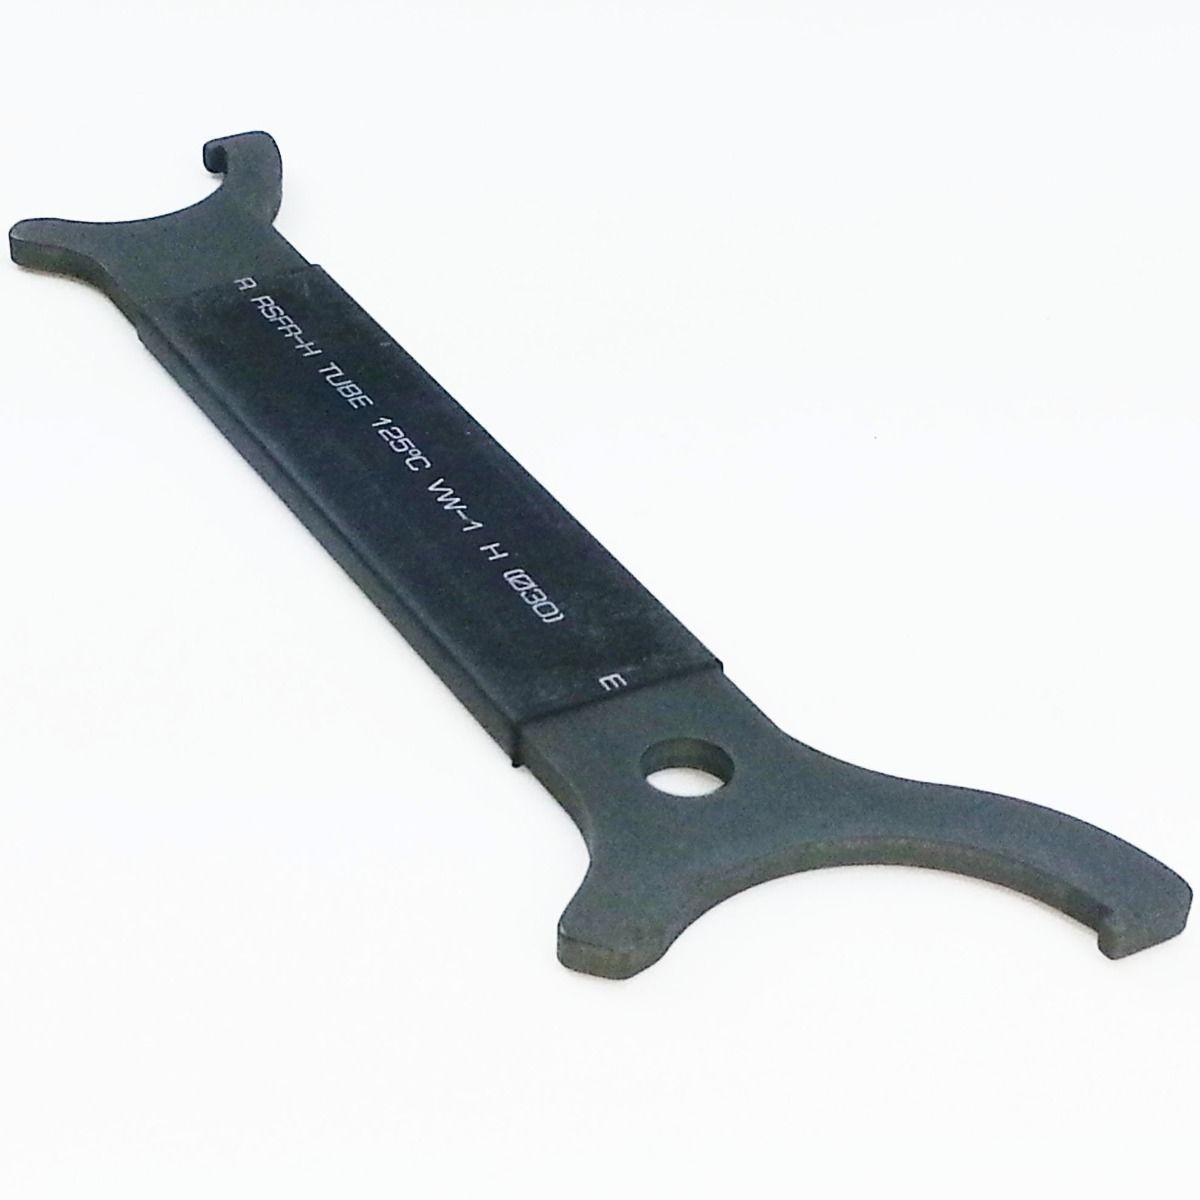 Tool Free Float Handguard Jam Nut Wrench Armorer Tool and Rifle Stock Spanner 